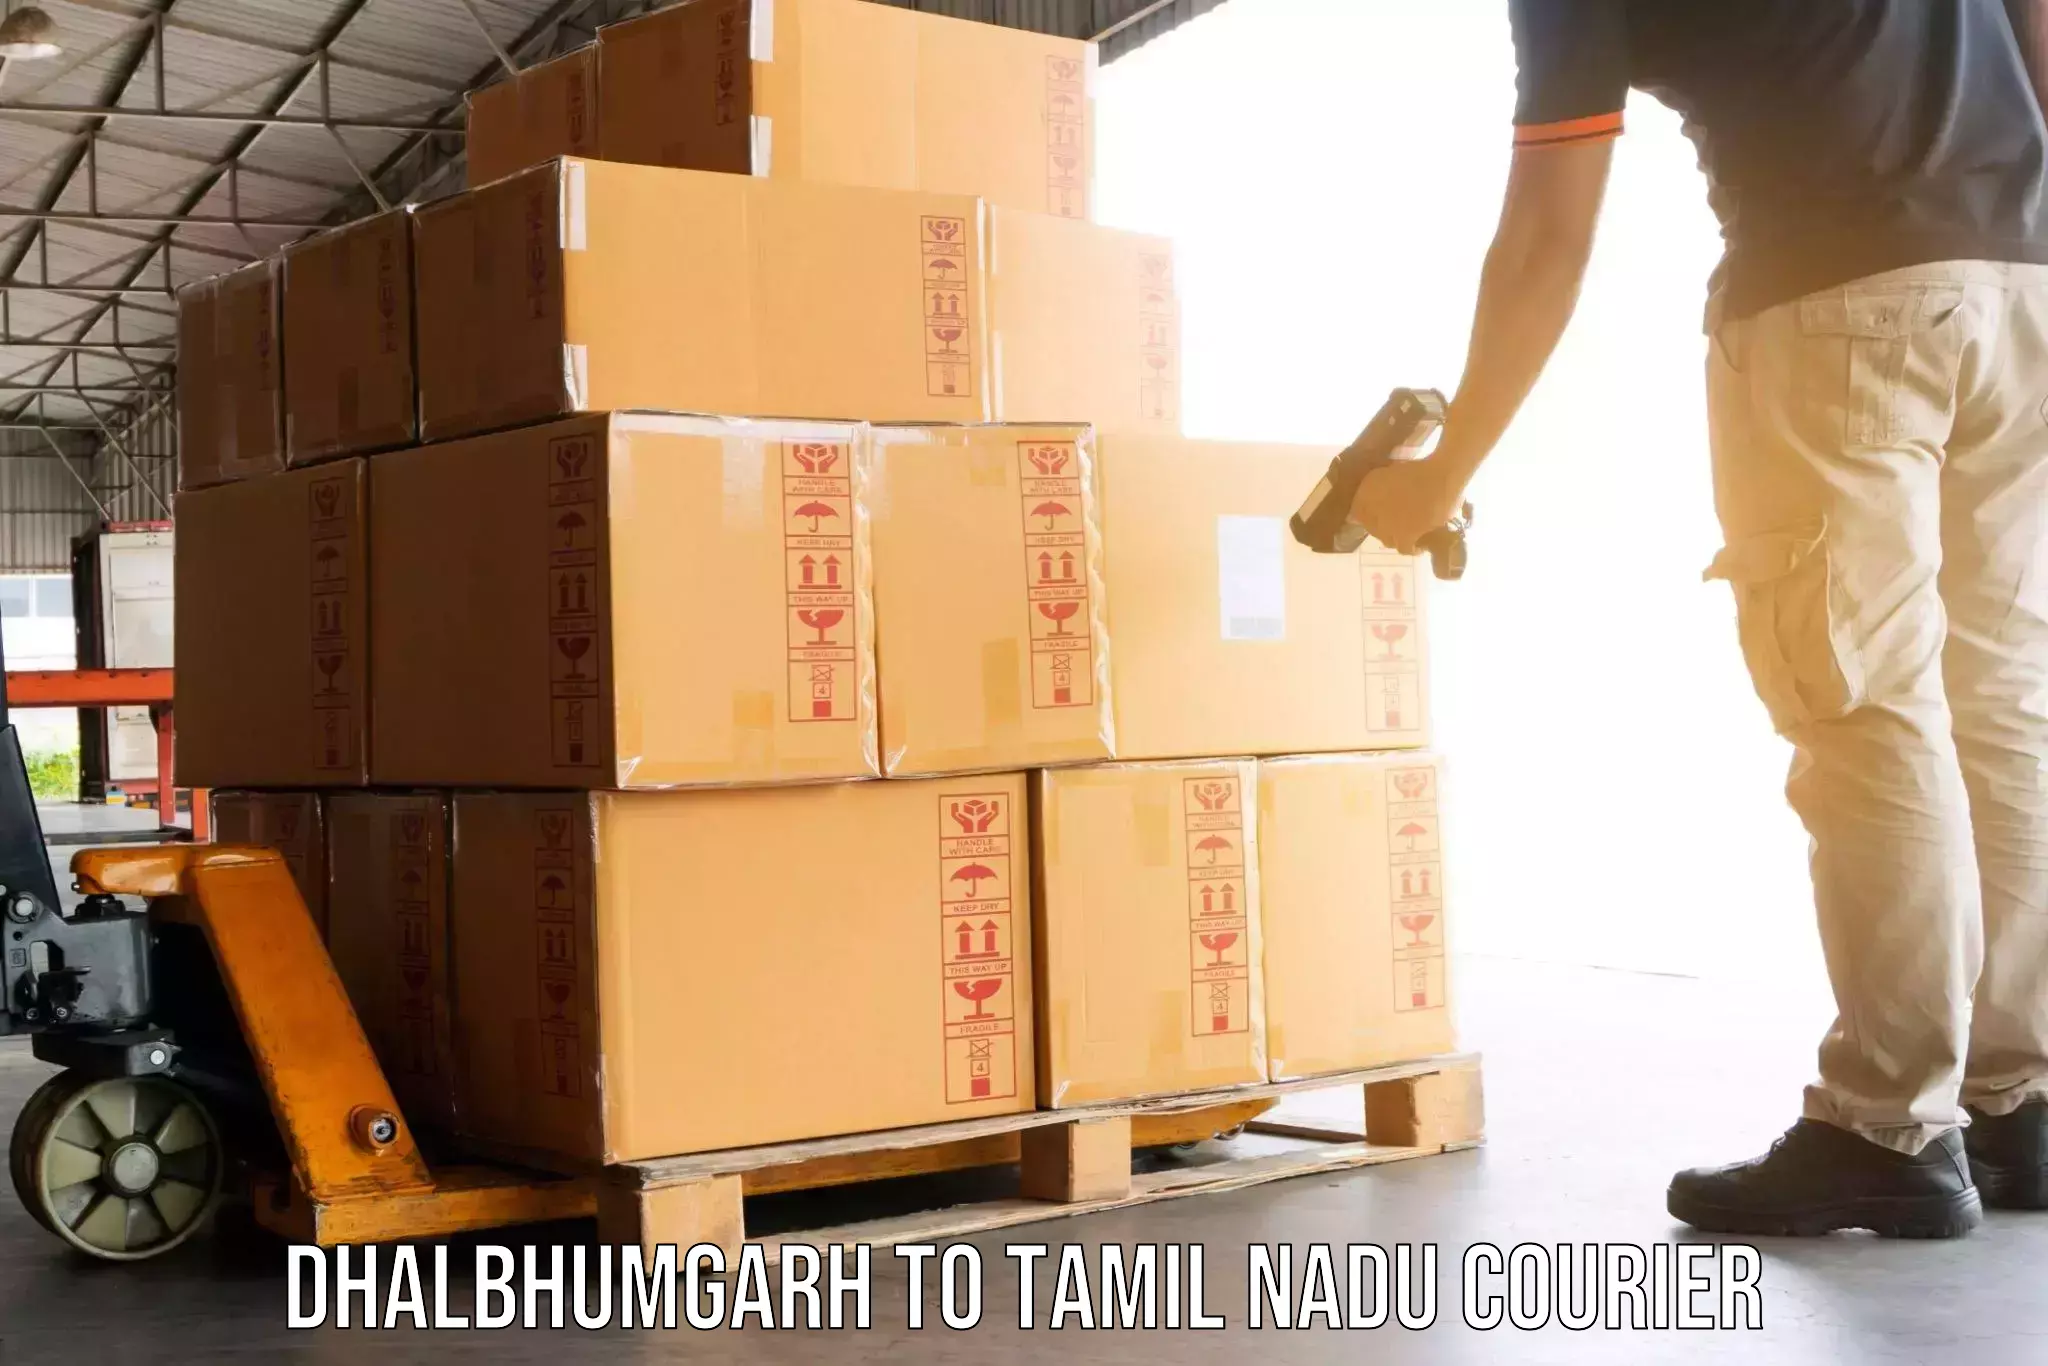 Skilled furniture transporters Dhalbhumgarh to Trichy